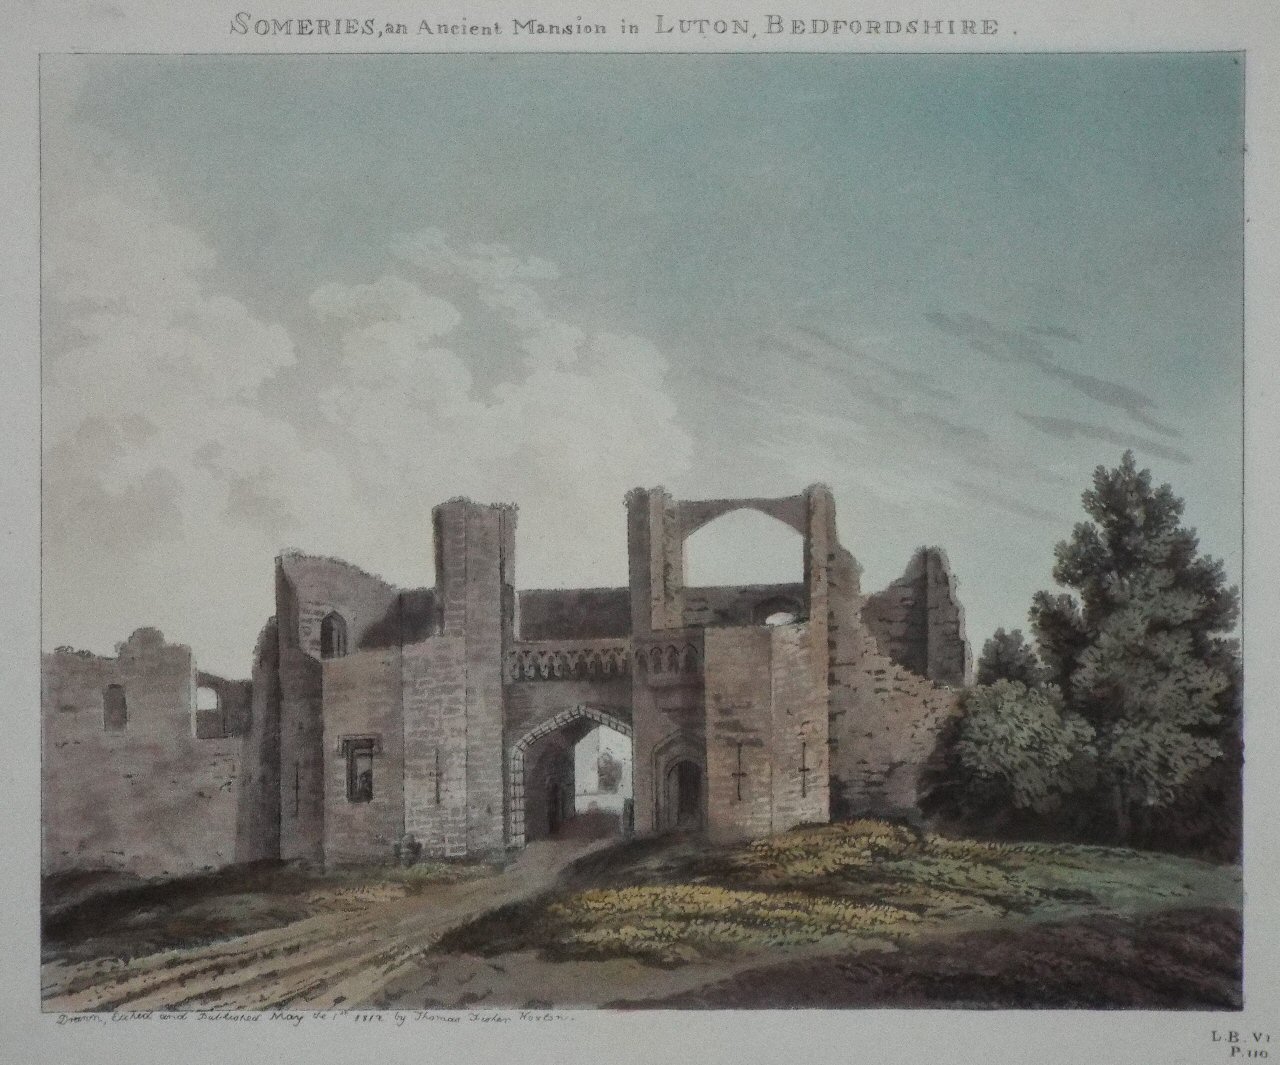 Aquatint - Someries, an Ancient Mansion in Luton, Bedfordshire. - Fisher